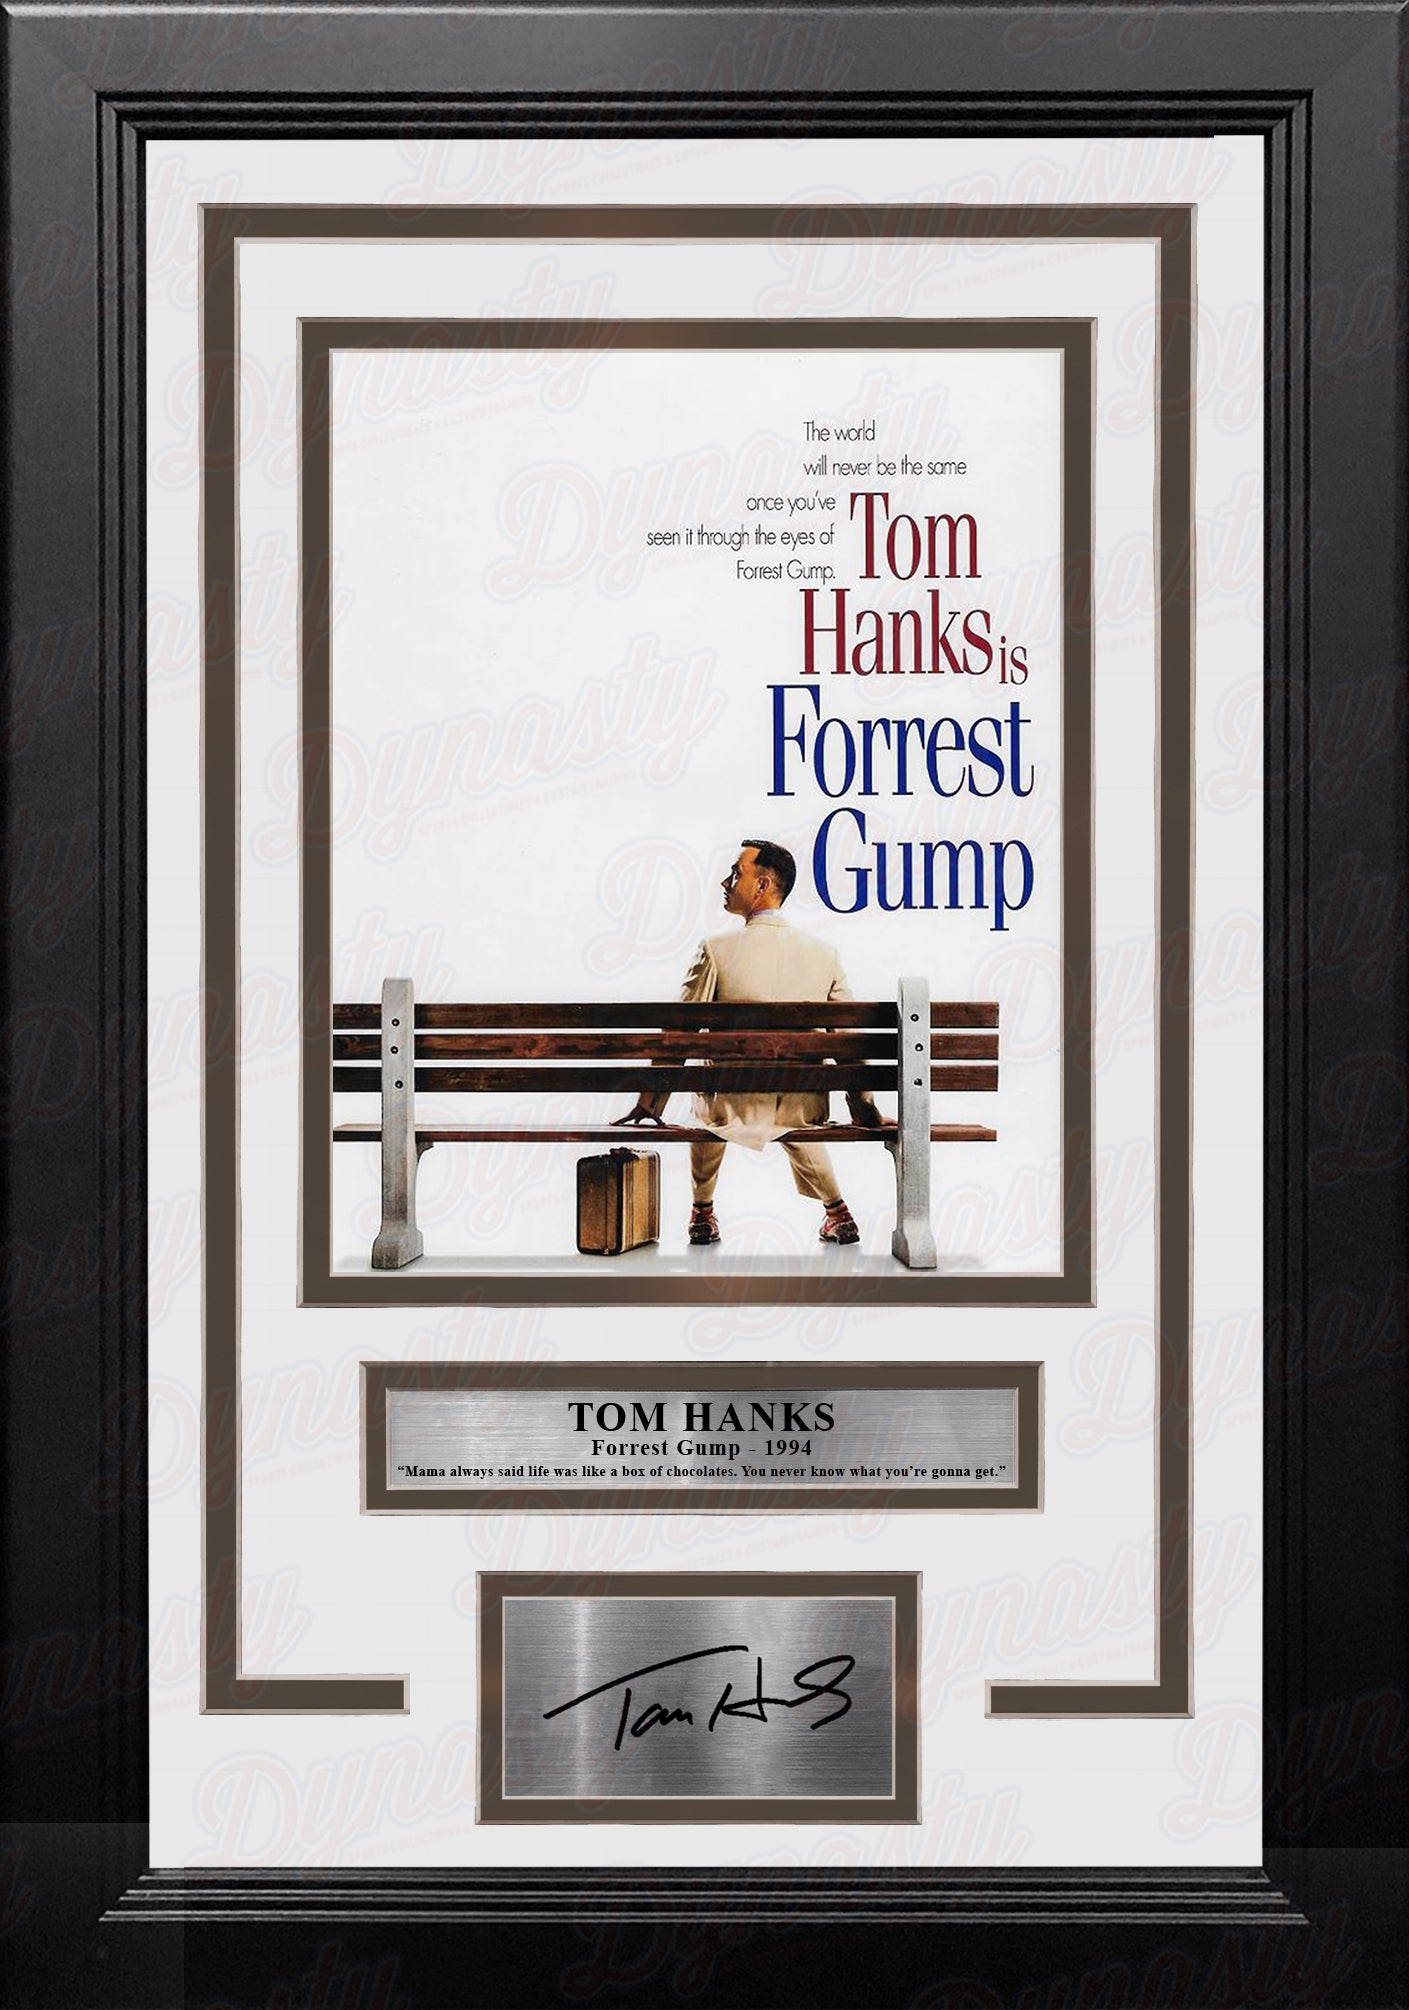 Tom Hanks Forrest Gump 8" x 10" Framed Photo with Engraved Autograph - Dynasty Sports & Framing 